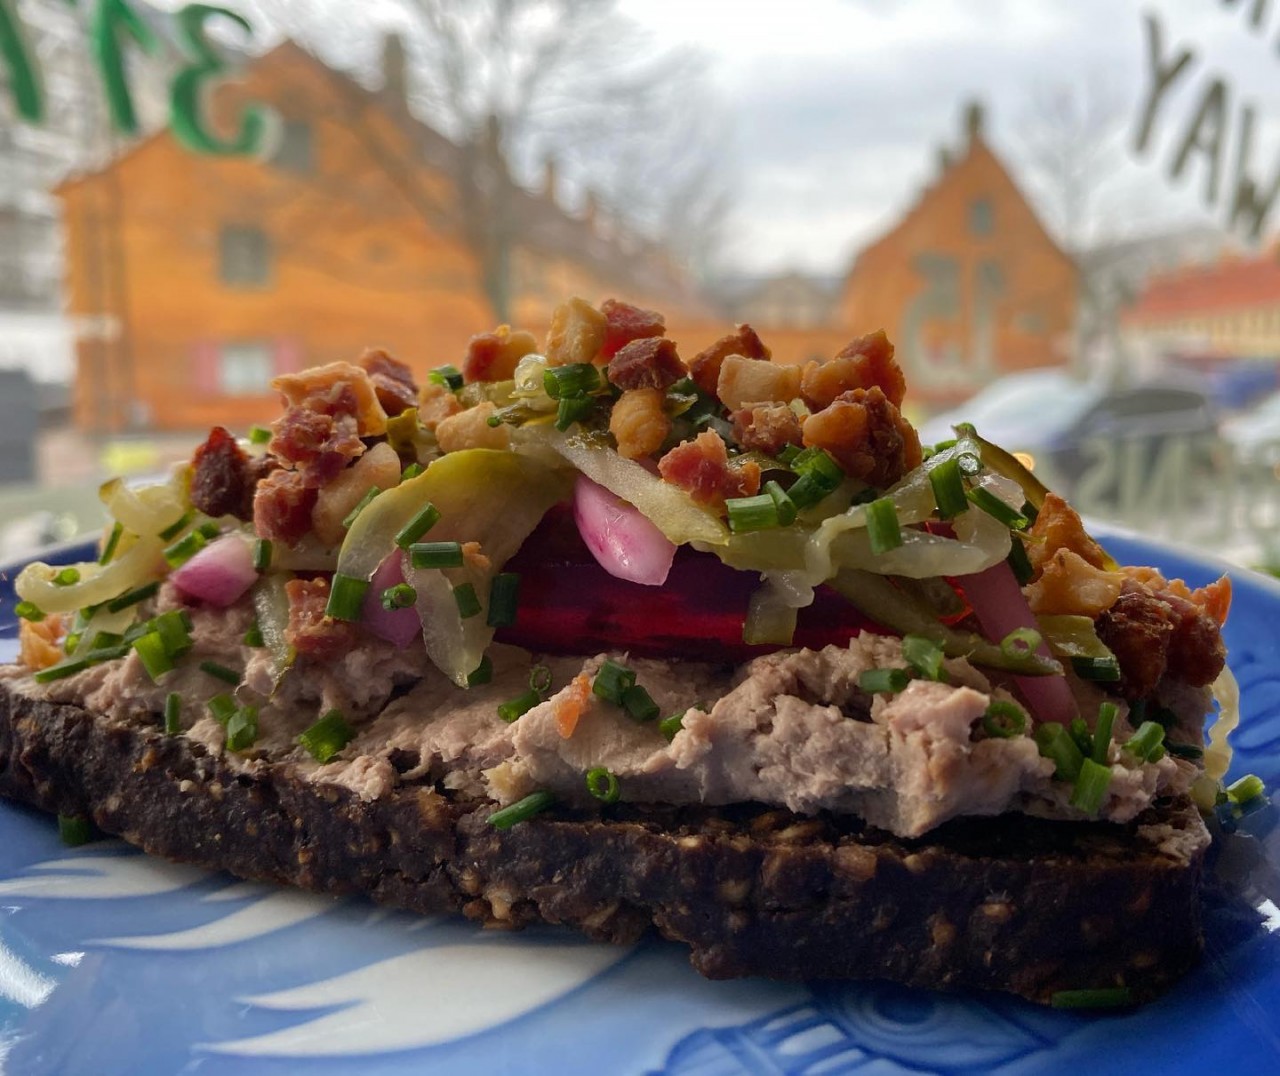 Discover Denmark’s cuisine with 9 local delicacies